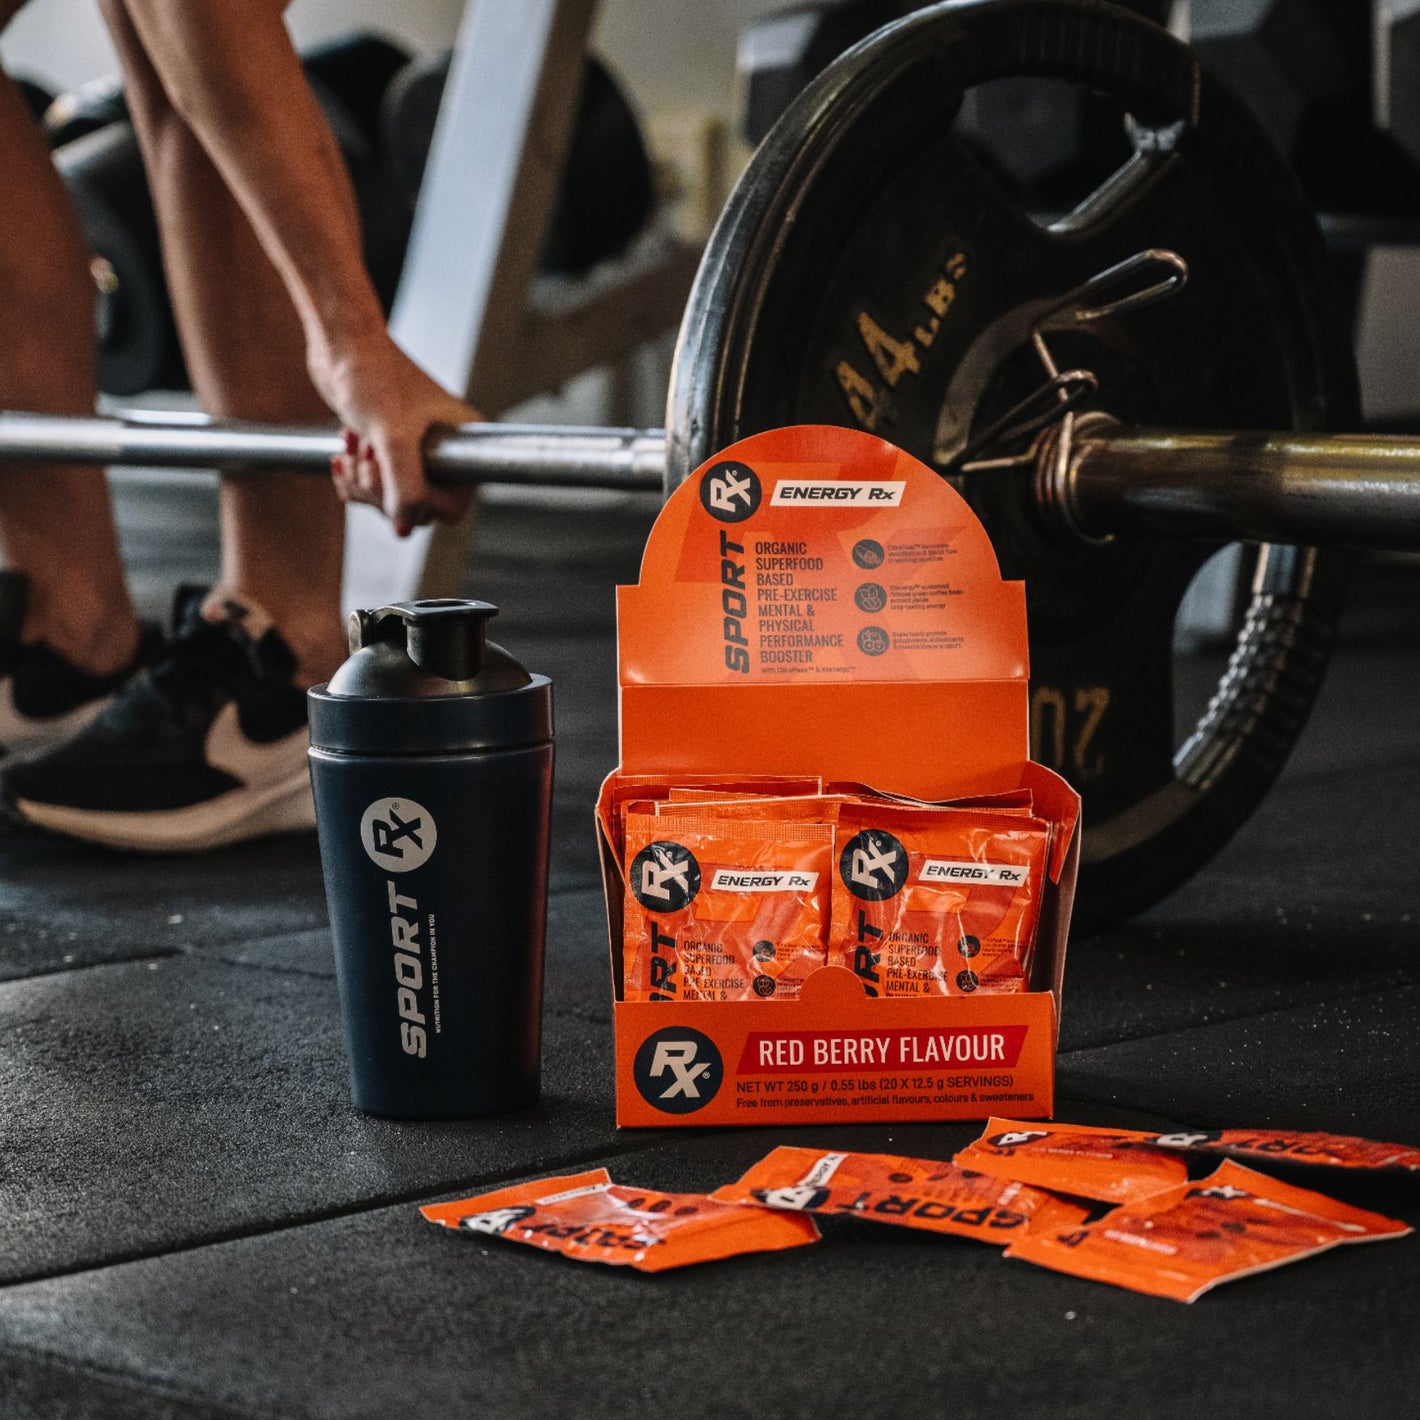 SPORT_Rx_Shaker_And_ENERGY_Rx_Product_In_A_Gym_Setting